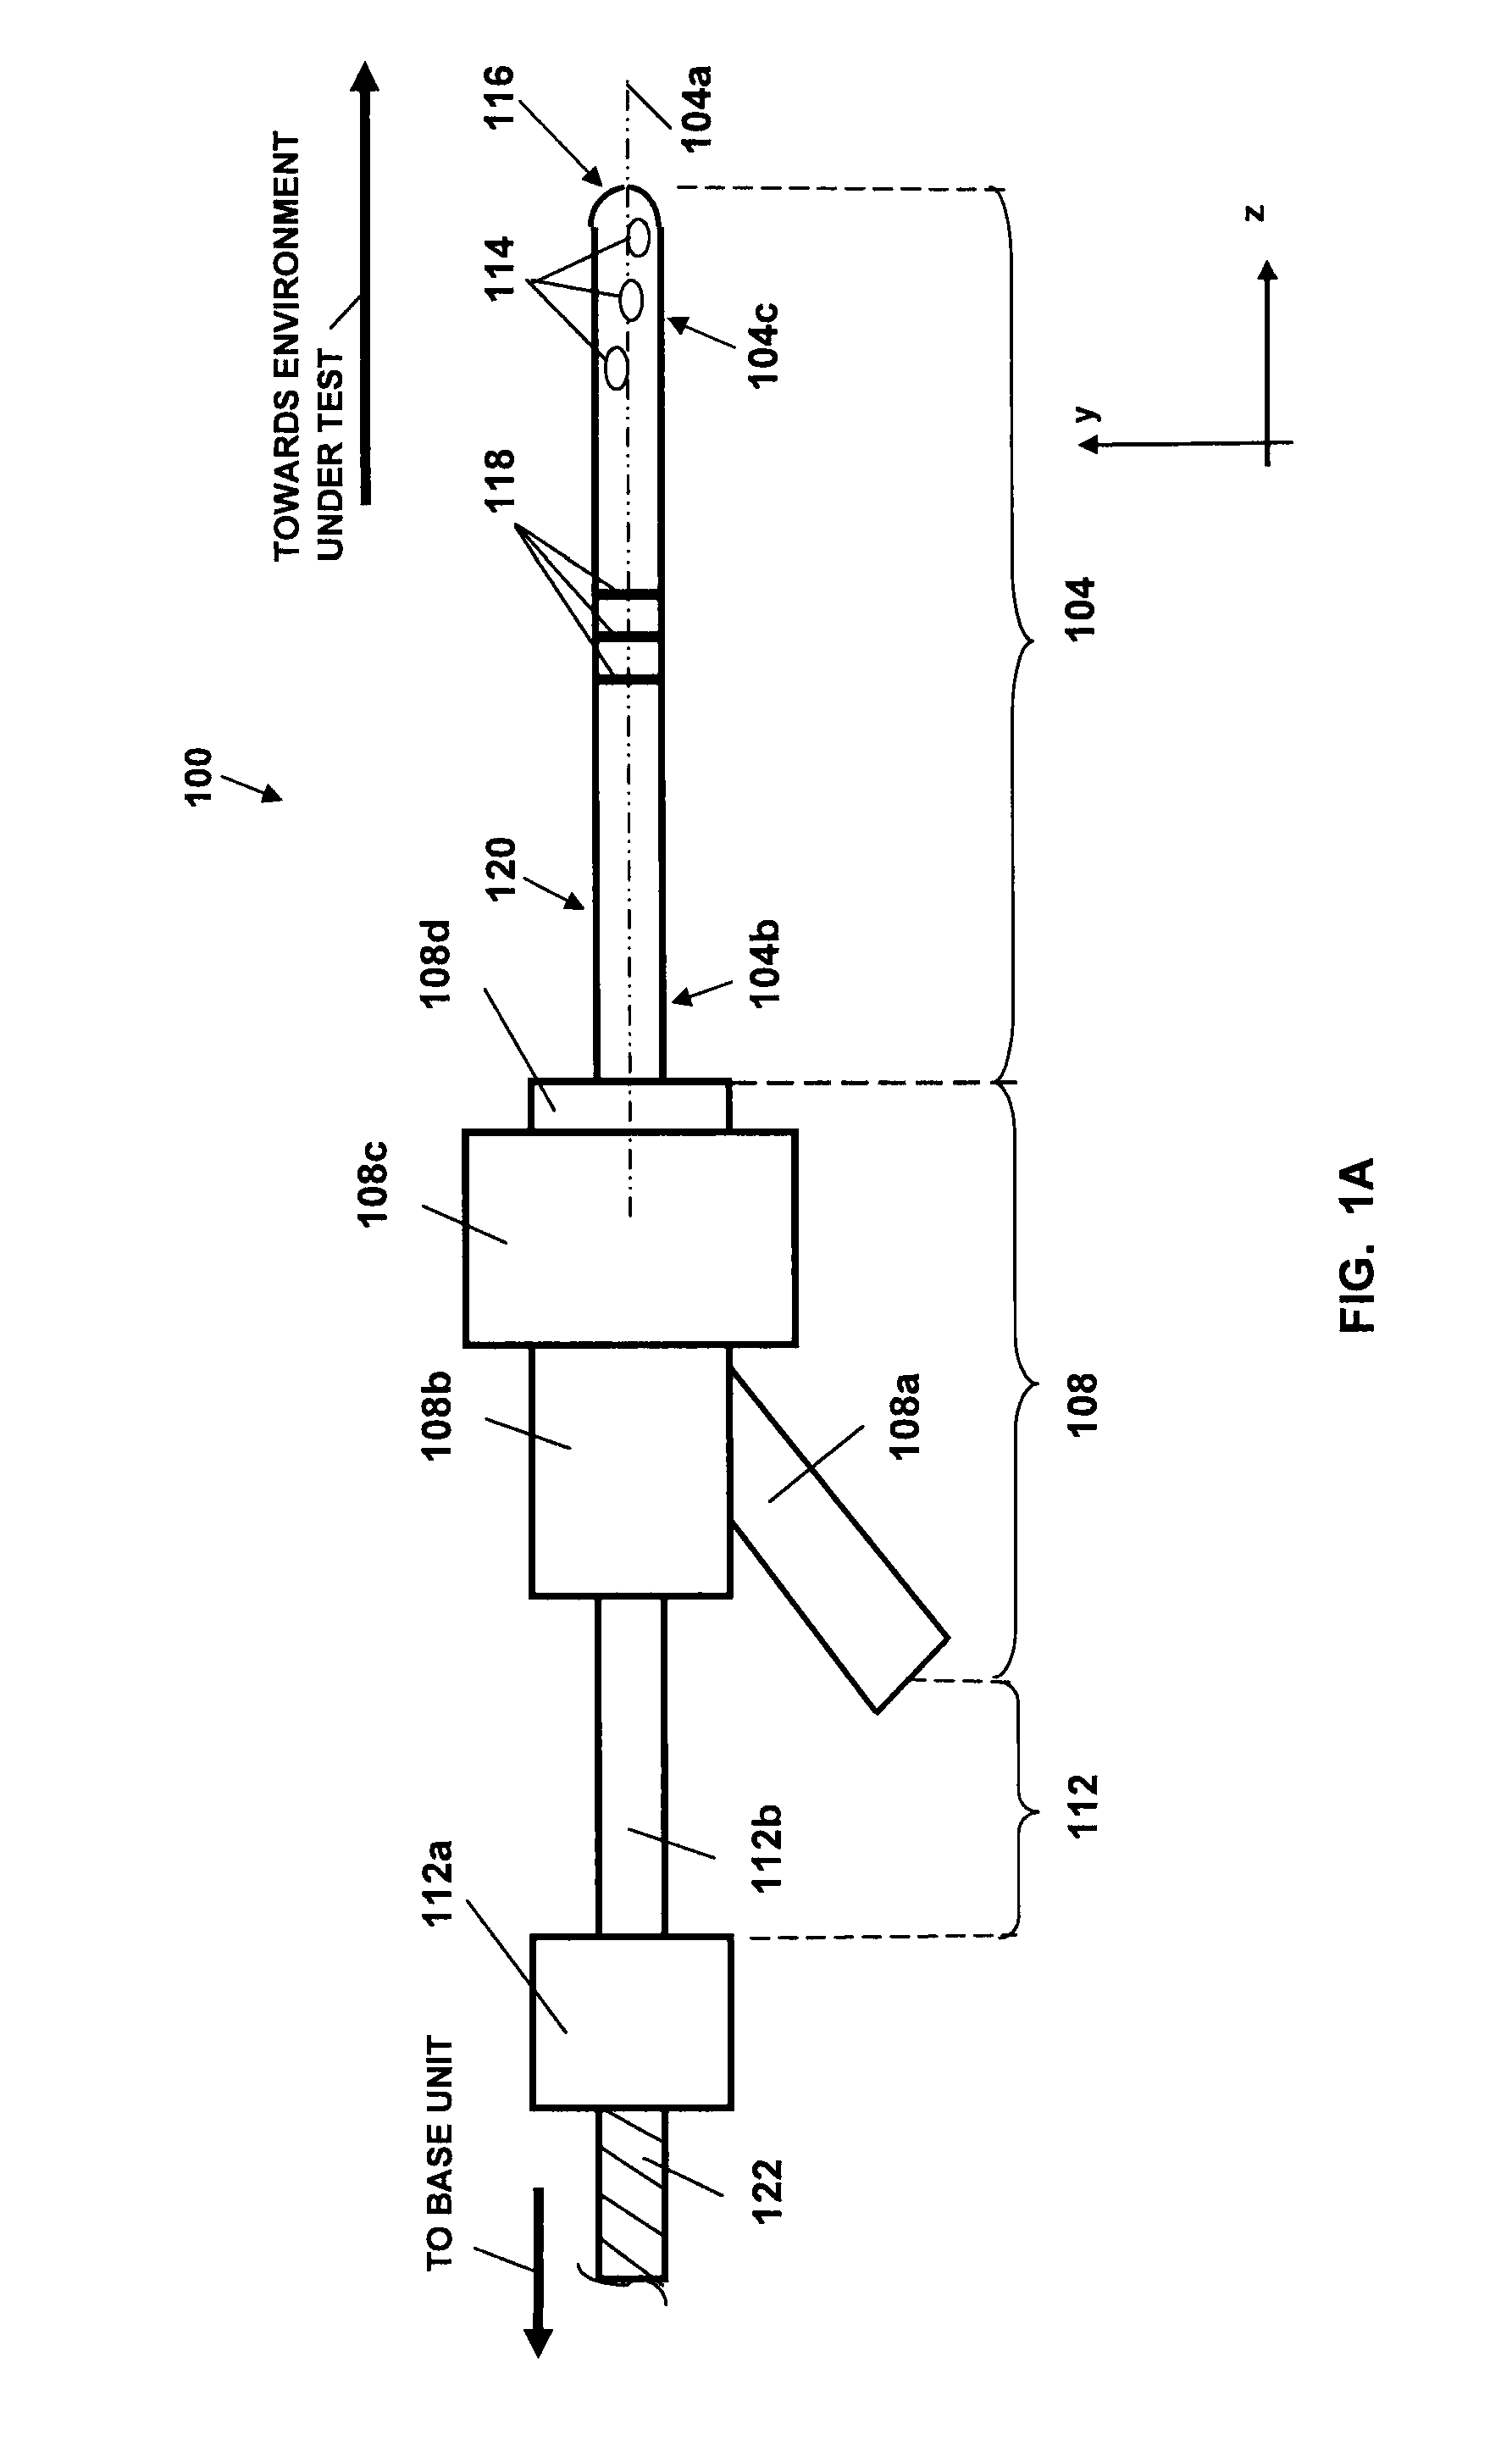 Fiber-optic probe with embedded peripheral sensors for in-situ continuous monitoring